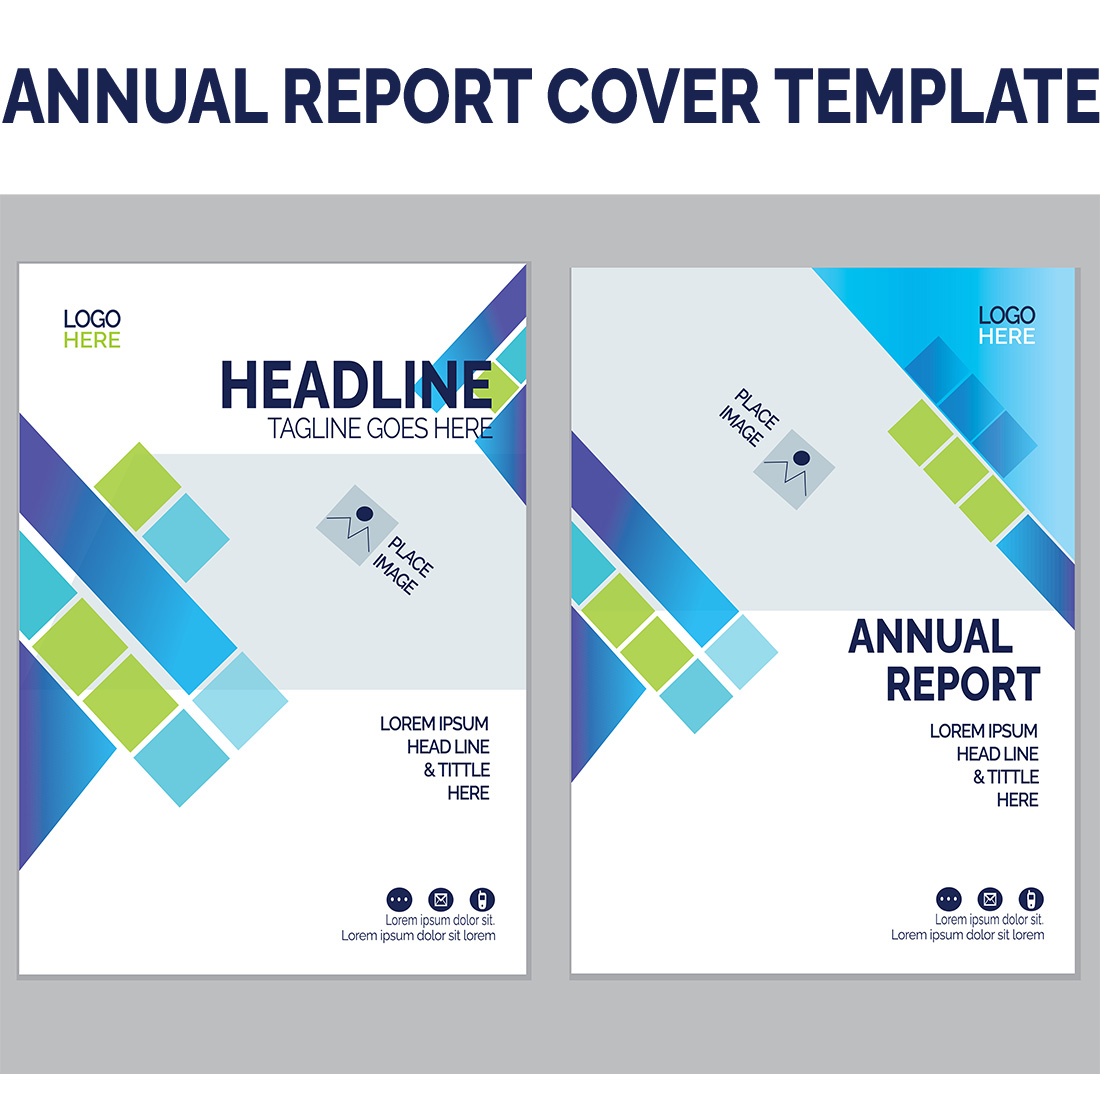 Annual Report cover template preview image.